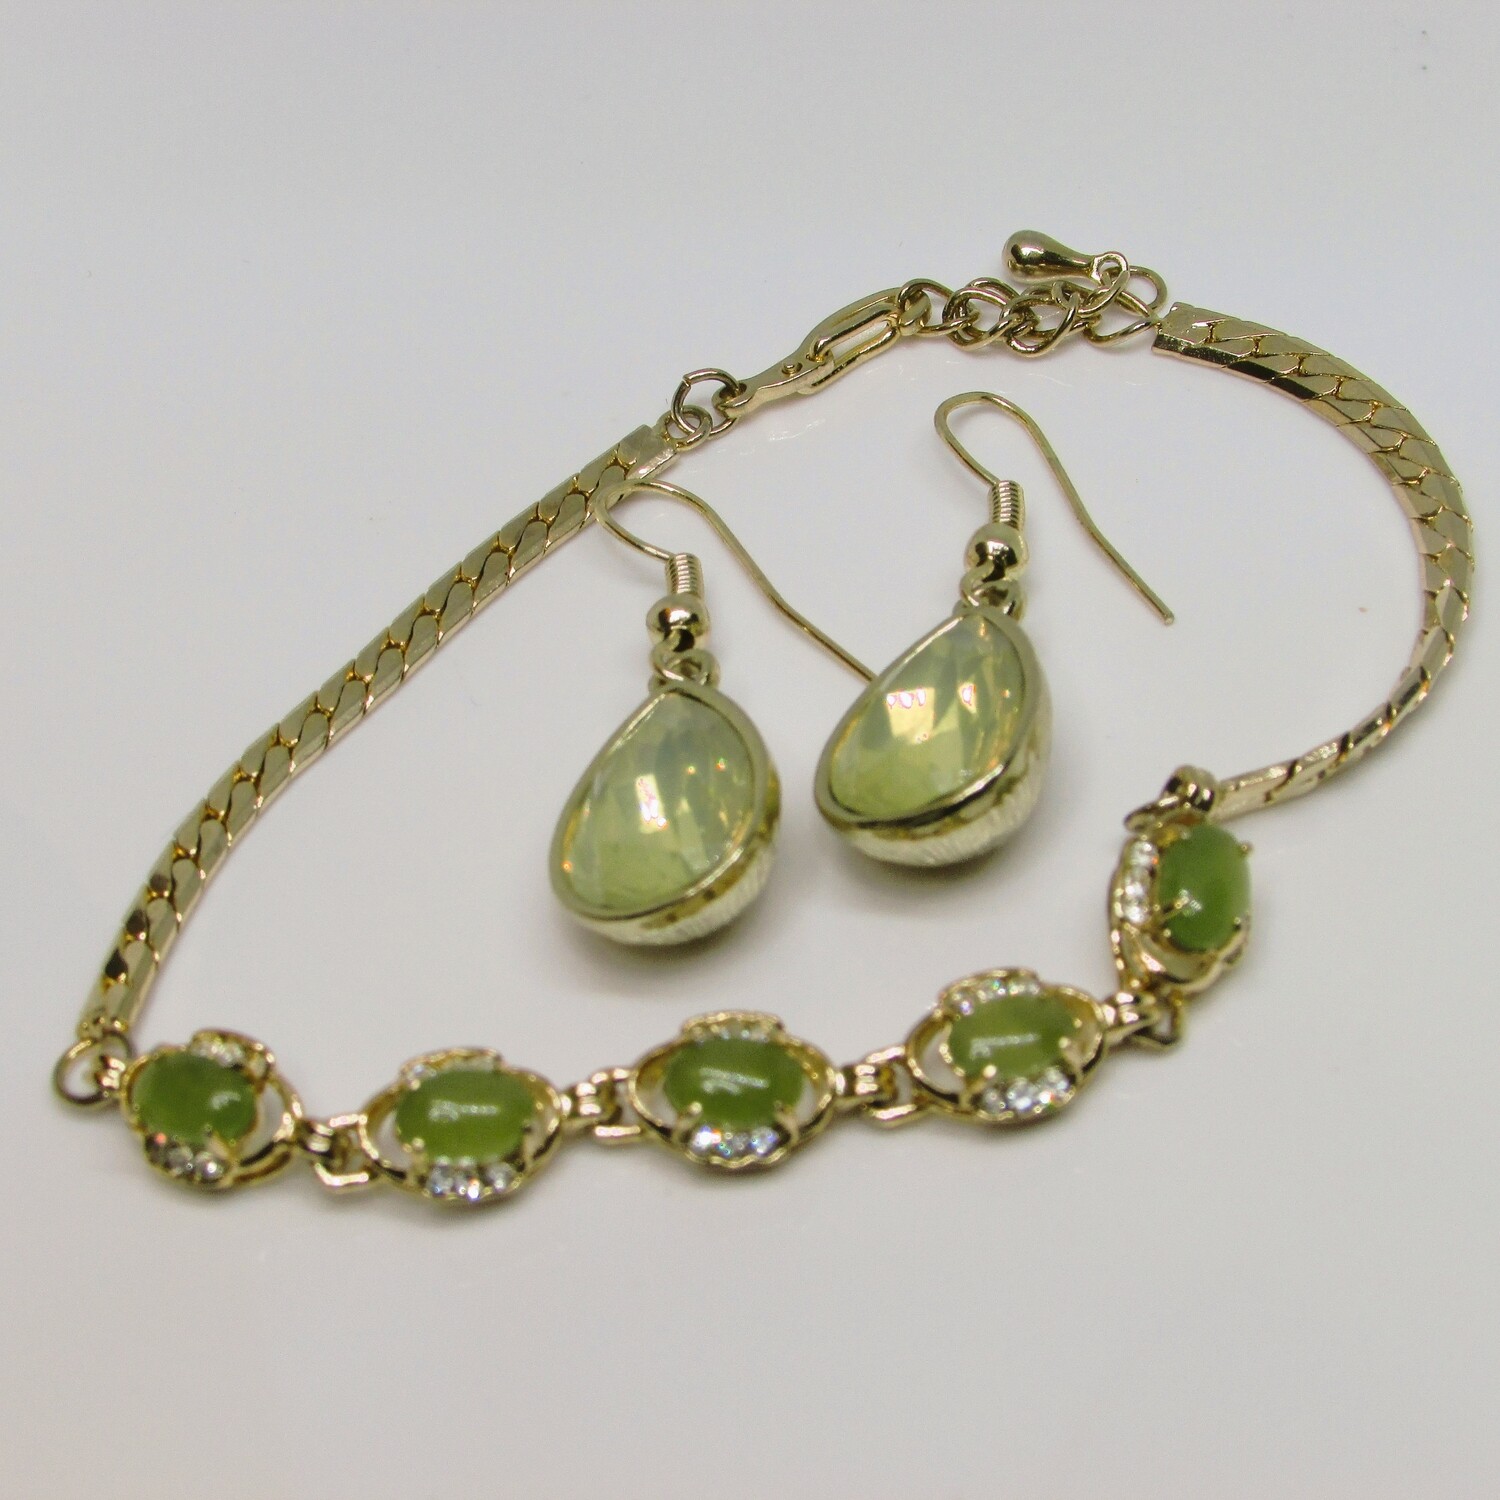 10k Gold Plated BC Jade Cabochon & Rhinestone Link Bracelet with Faux Citrine Earrings c. 1970's